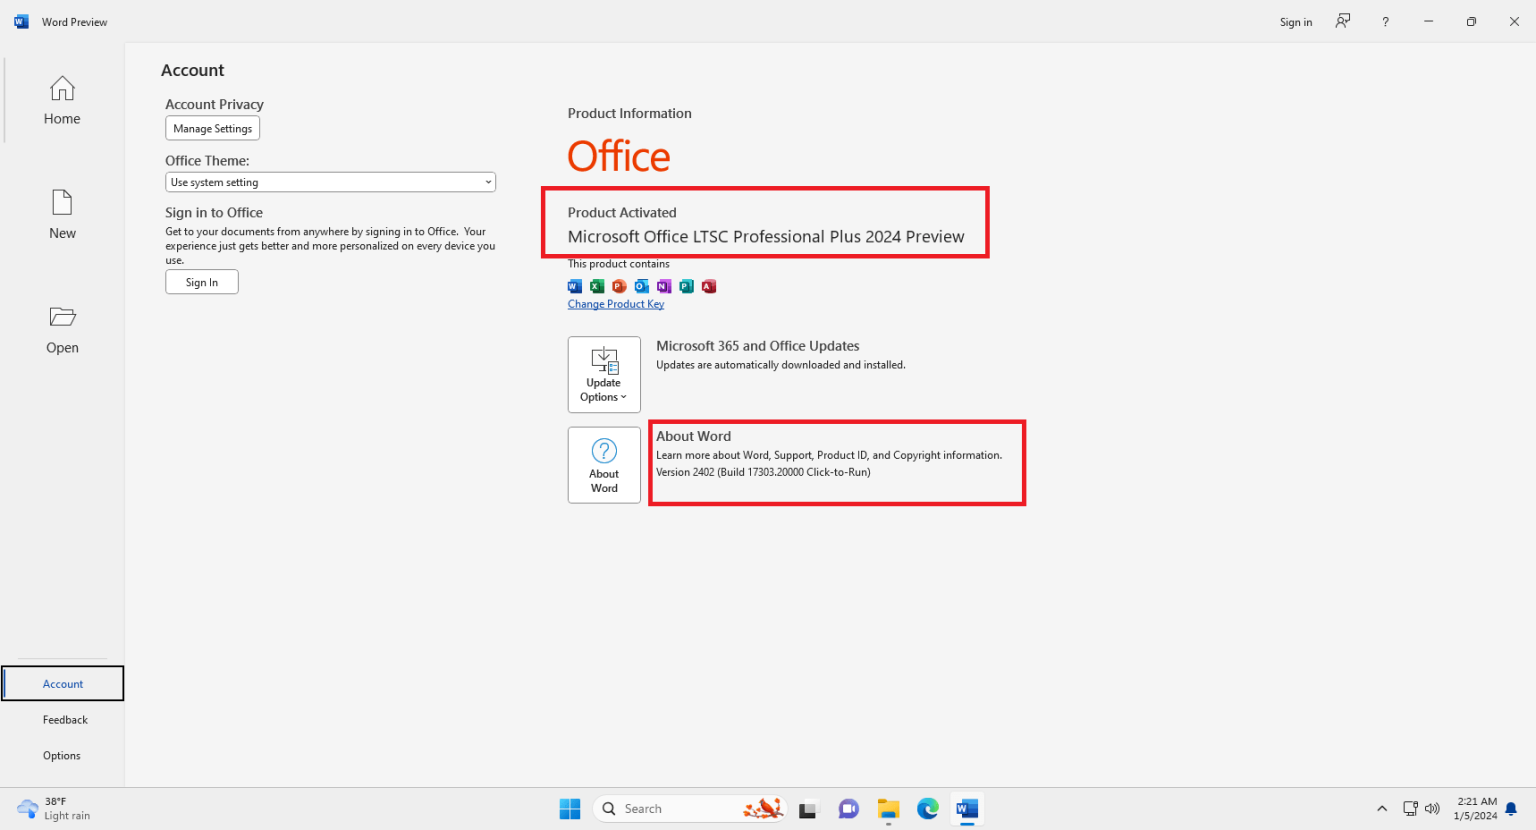 Download Microsoft Office 2024 Version 2402 Build 17307.20000 Preview